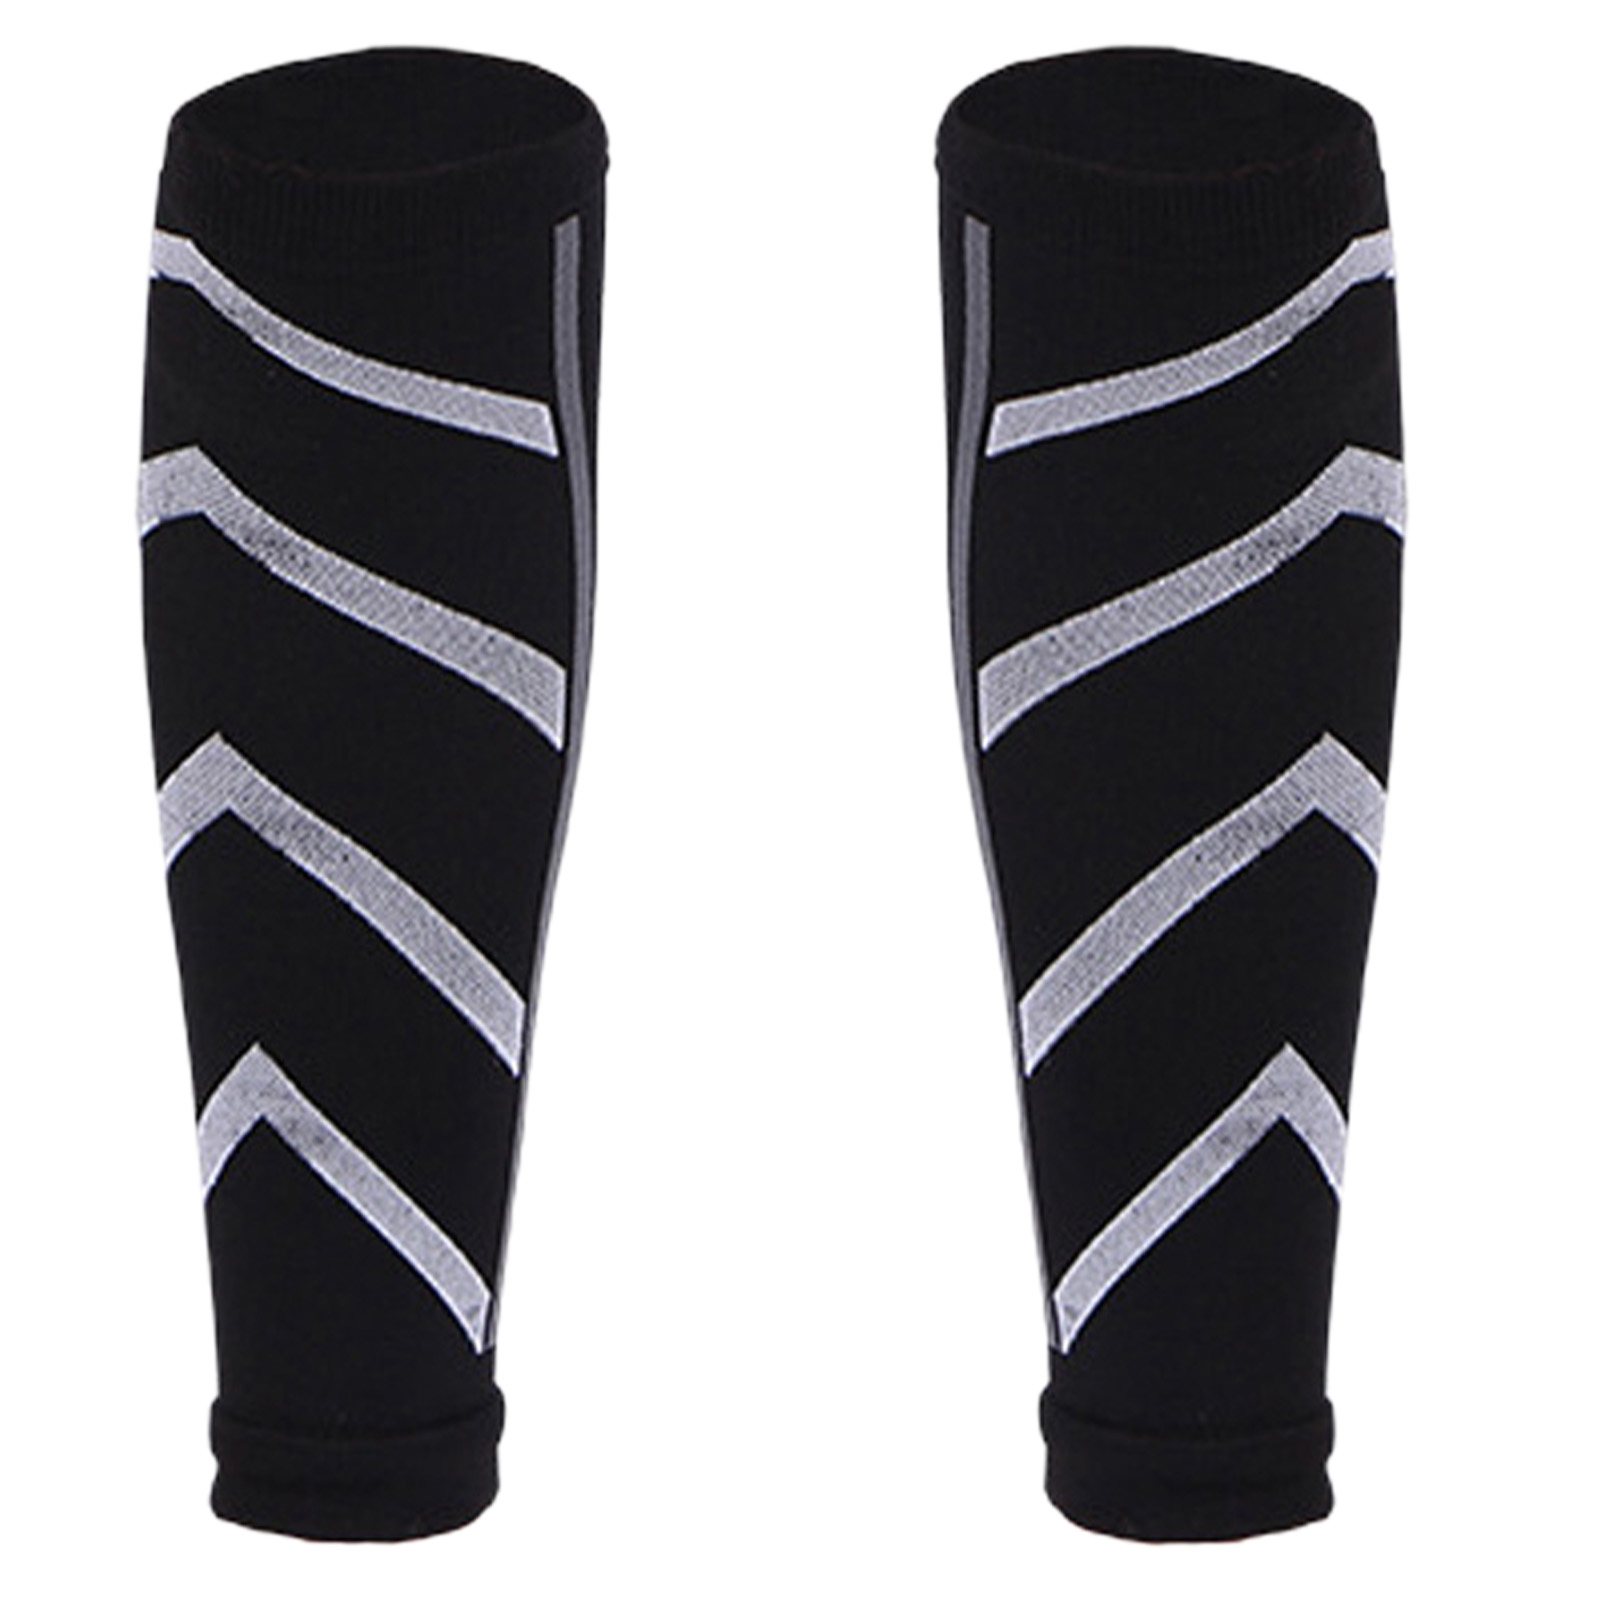 Calf Compression Sleeves Running Support Recovery Improve Blood Circulation For Shin Splint Men Women